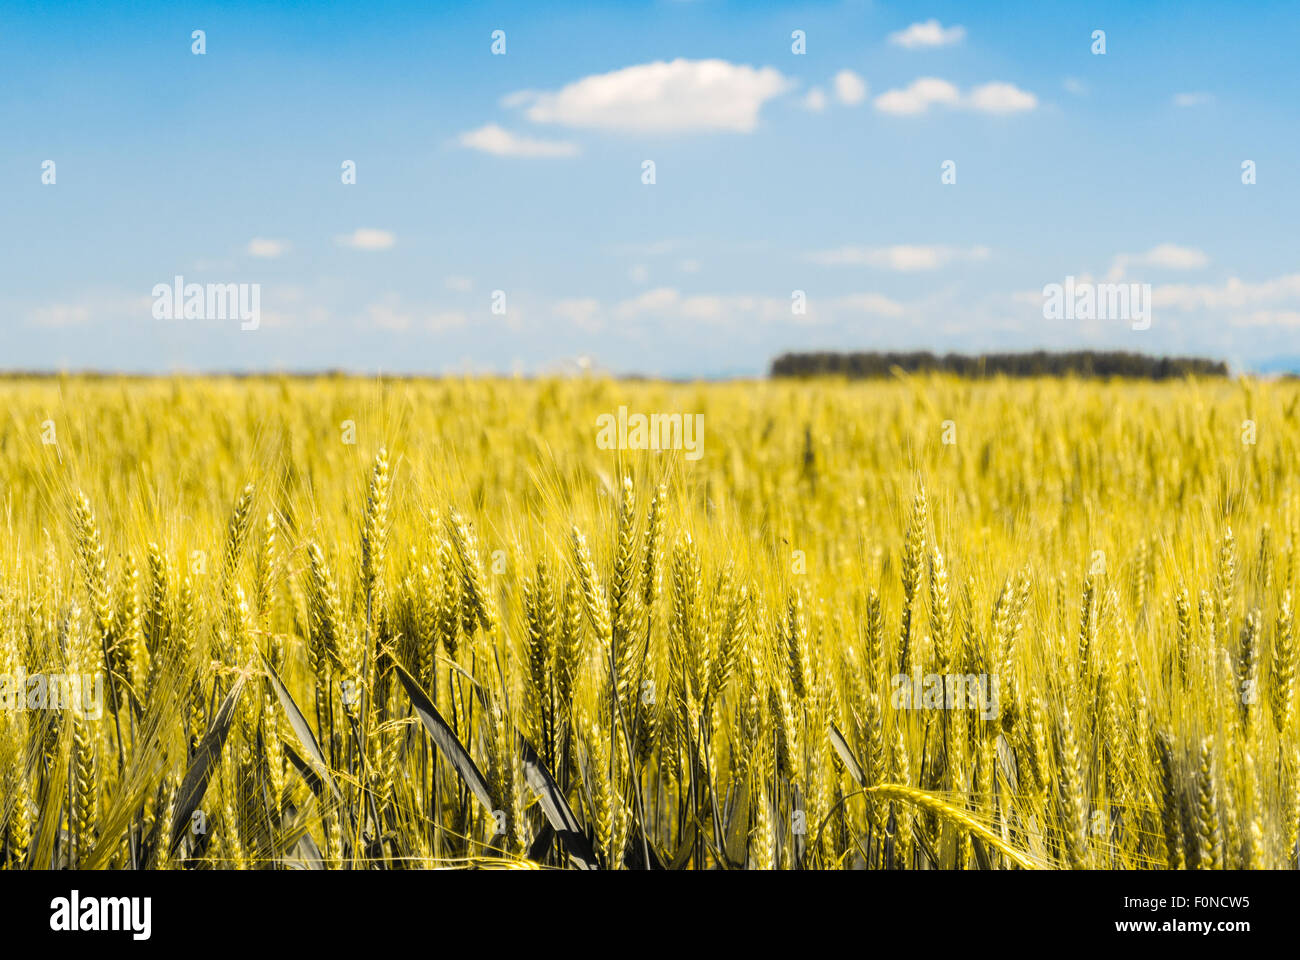 Detail of sheafs of wheat in a field with blue sky in background Stock Photo